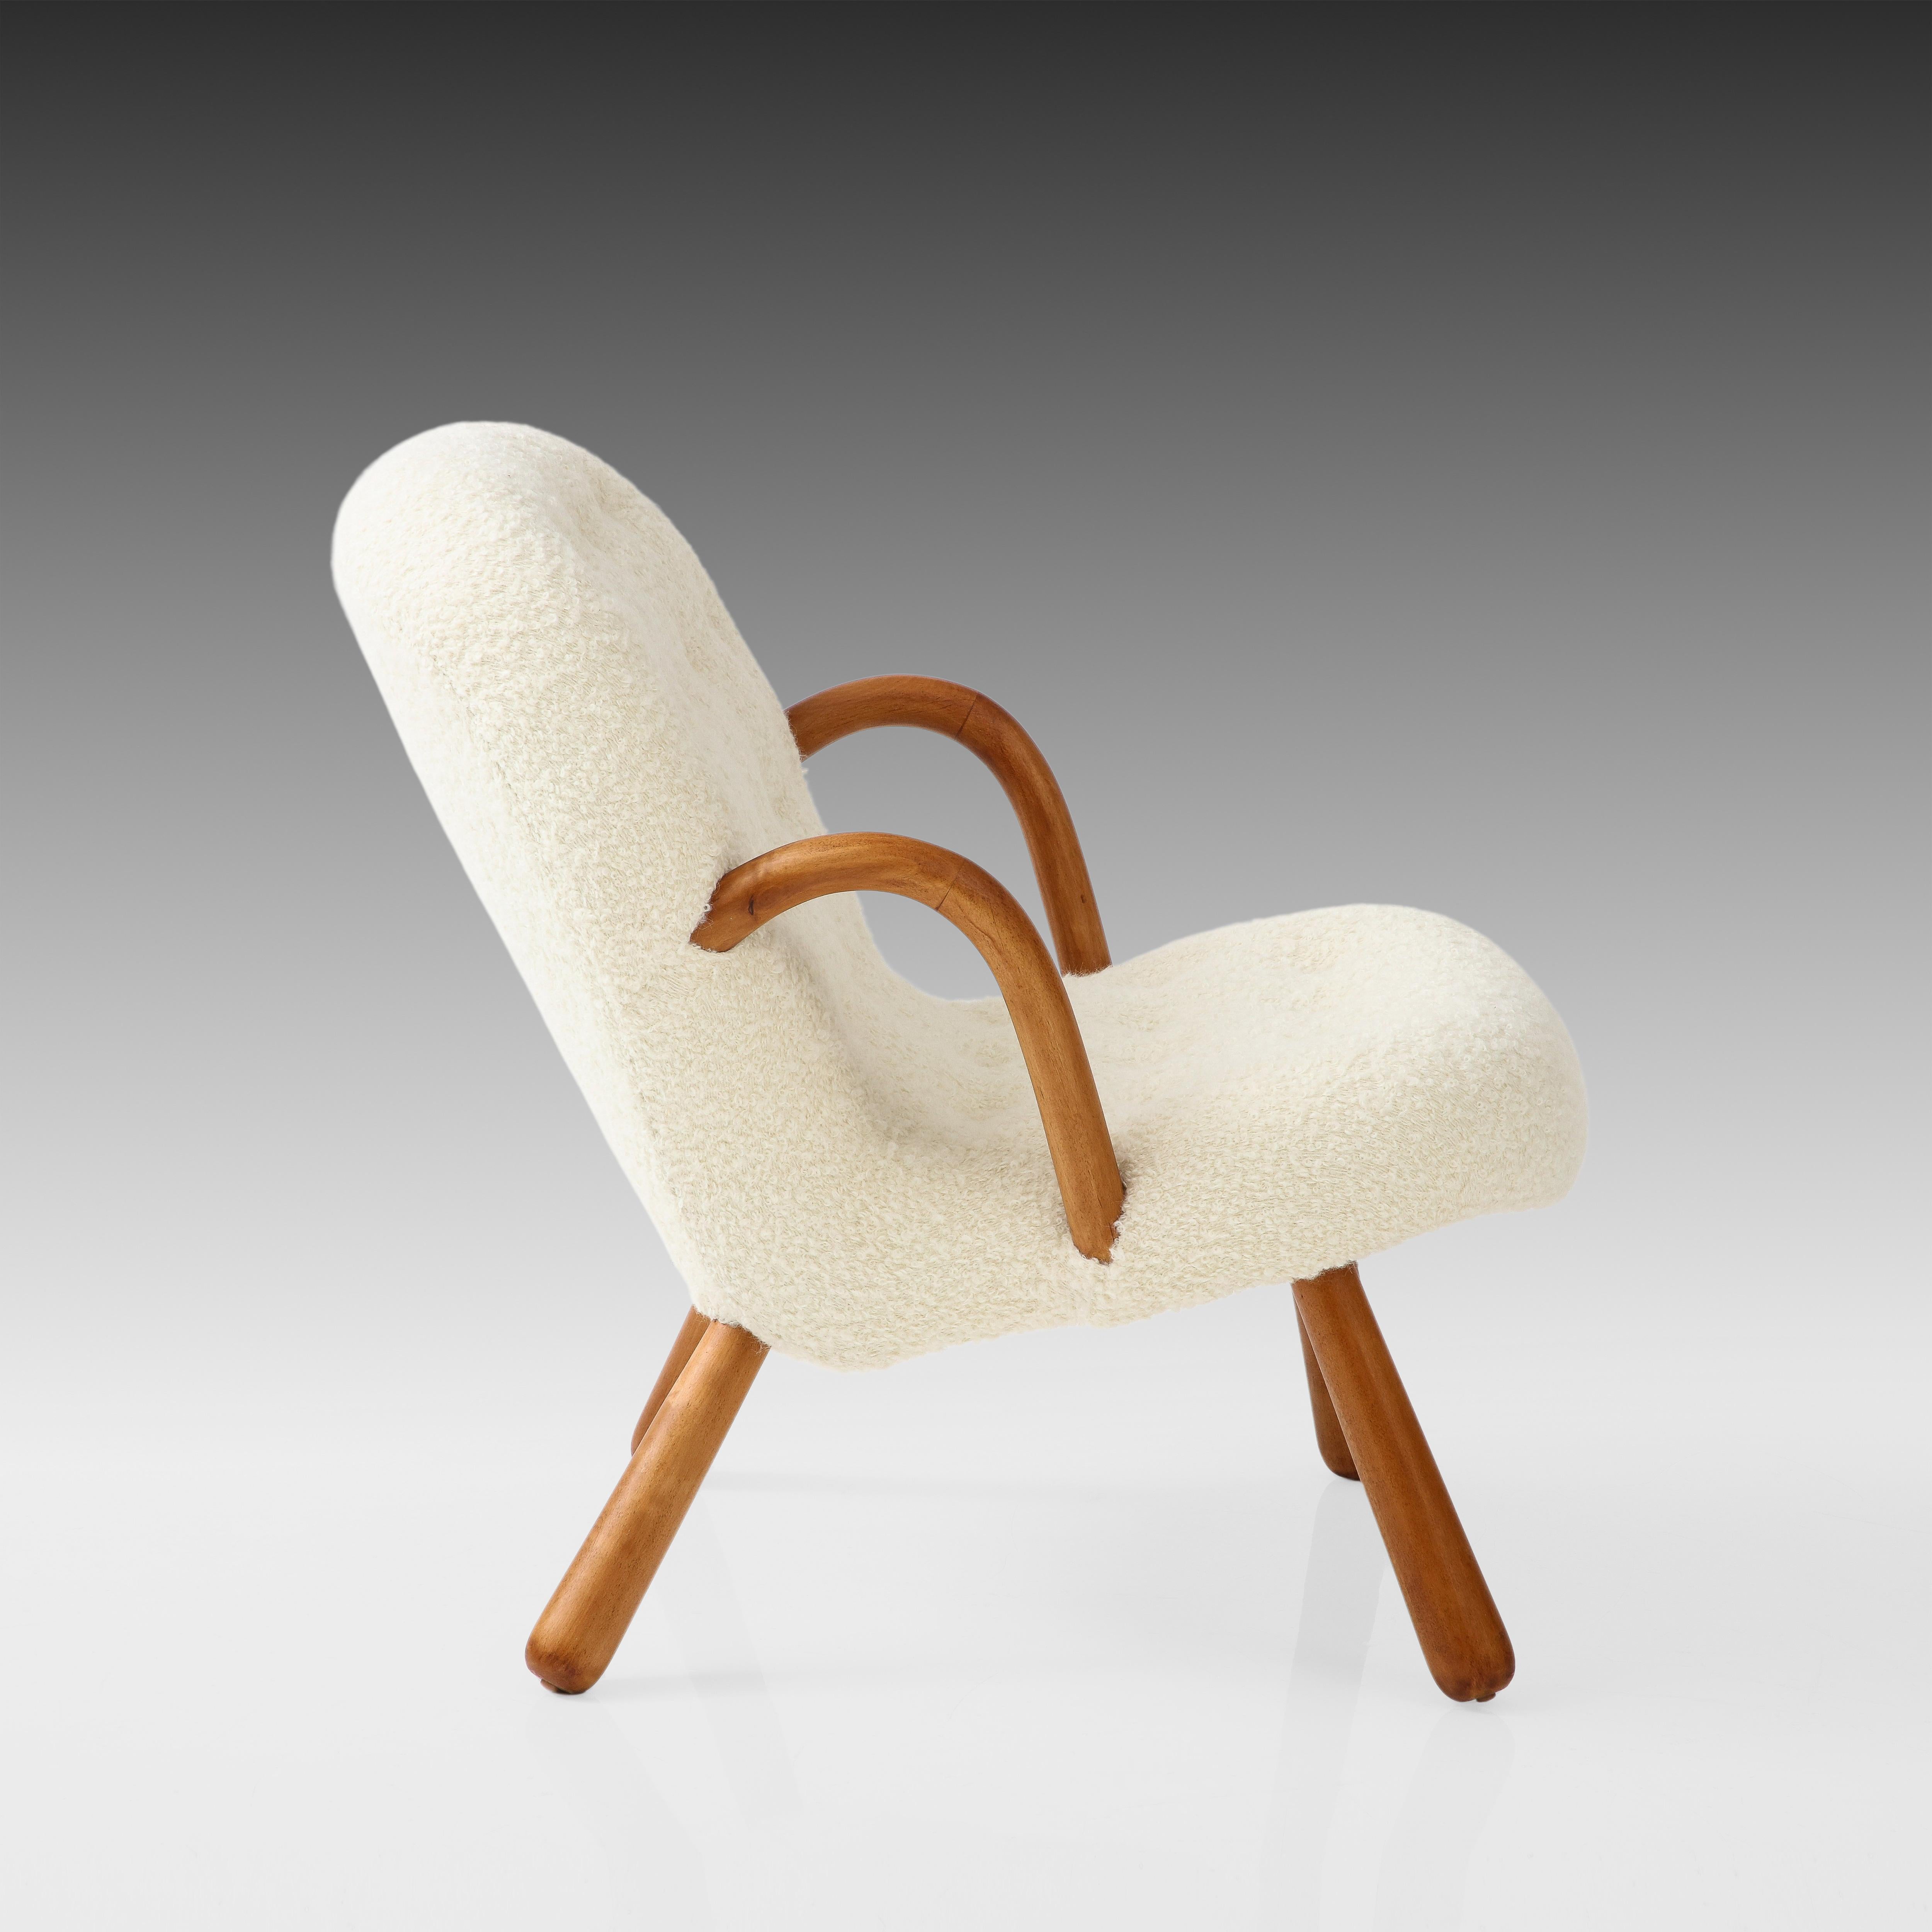 Arnold Madsen for Madsen & Schubell Rare Pair of Clam Chairs, Denmark, 1944 For Sale 5